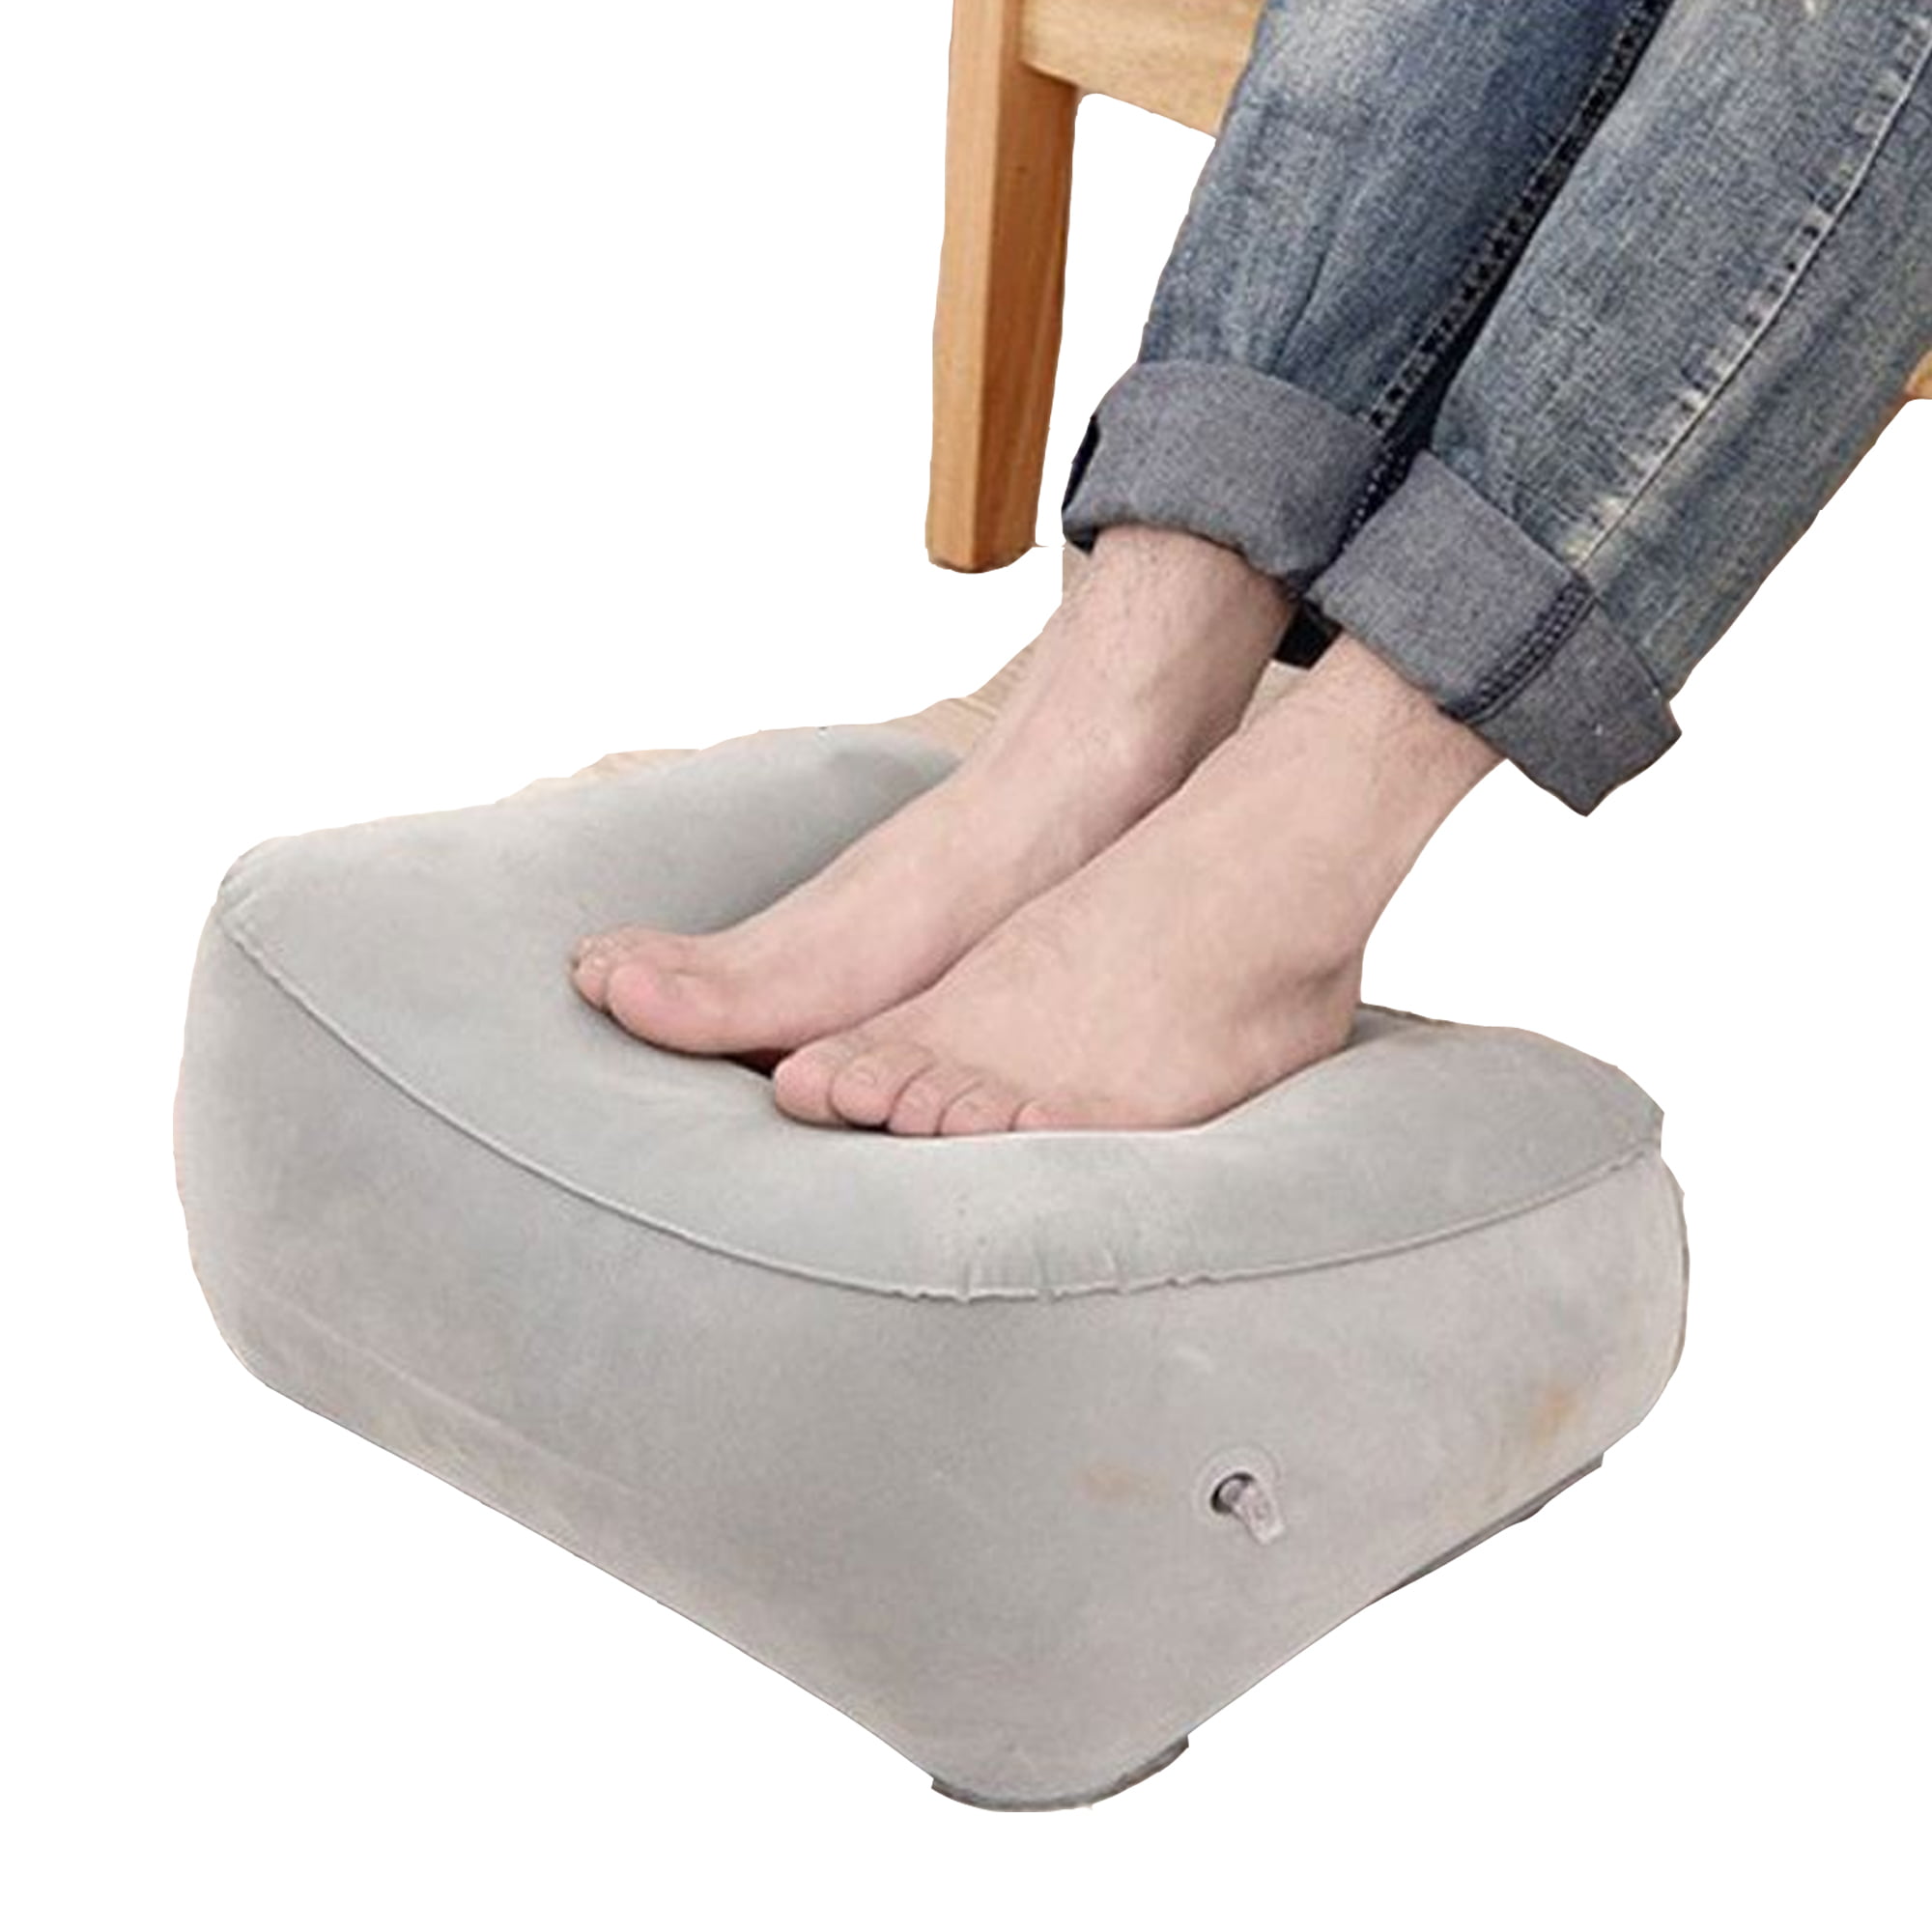 Legs Stretch or Curl Up Inflatable Travel Pillow Office Home Leg Up Footrest